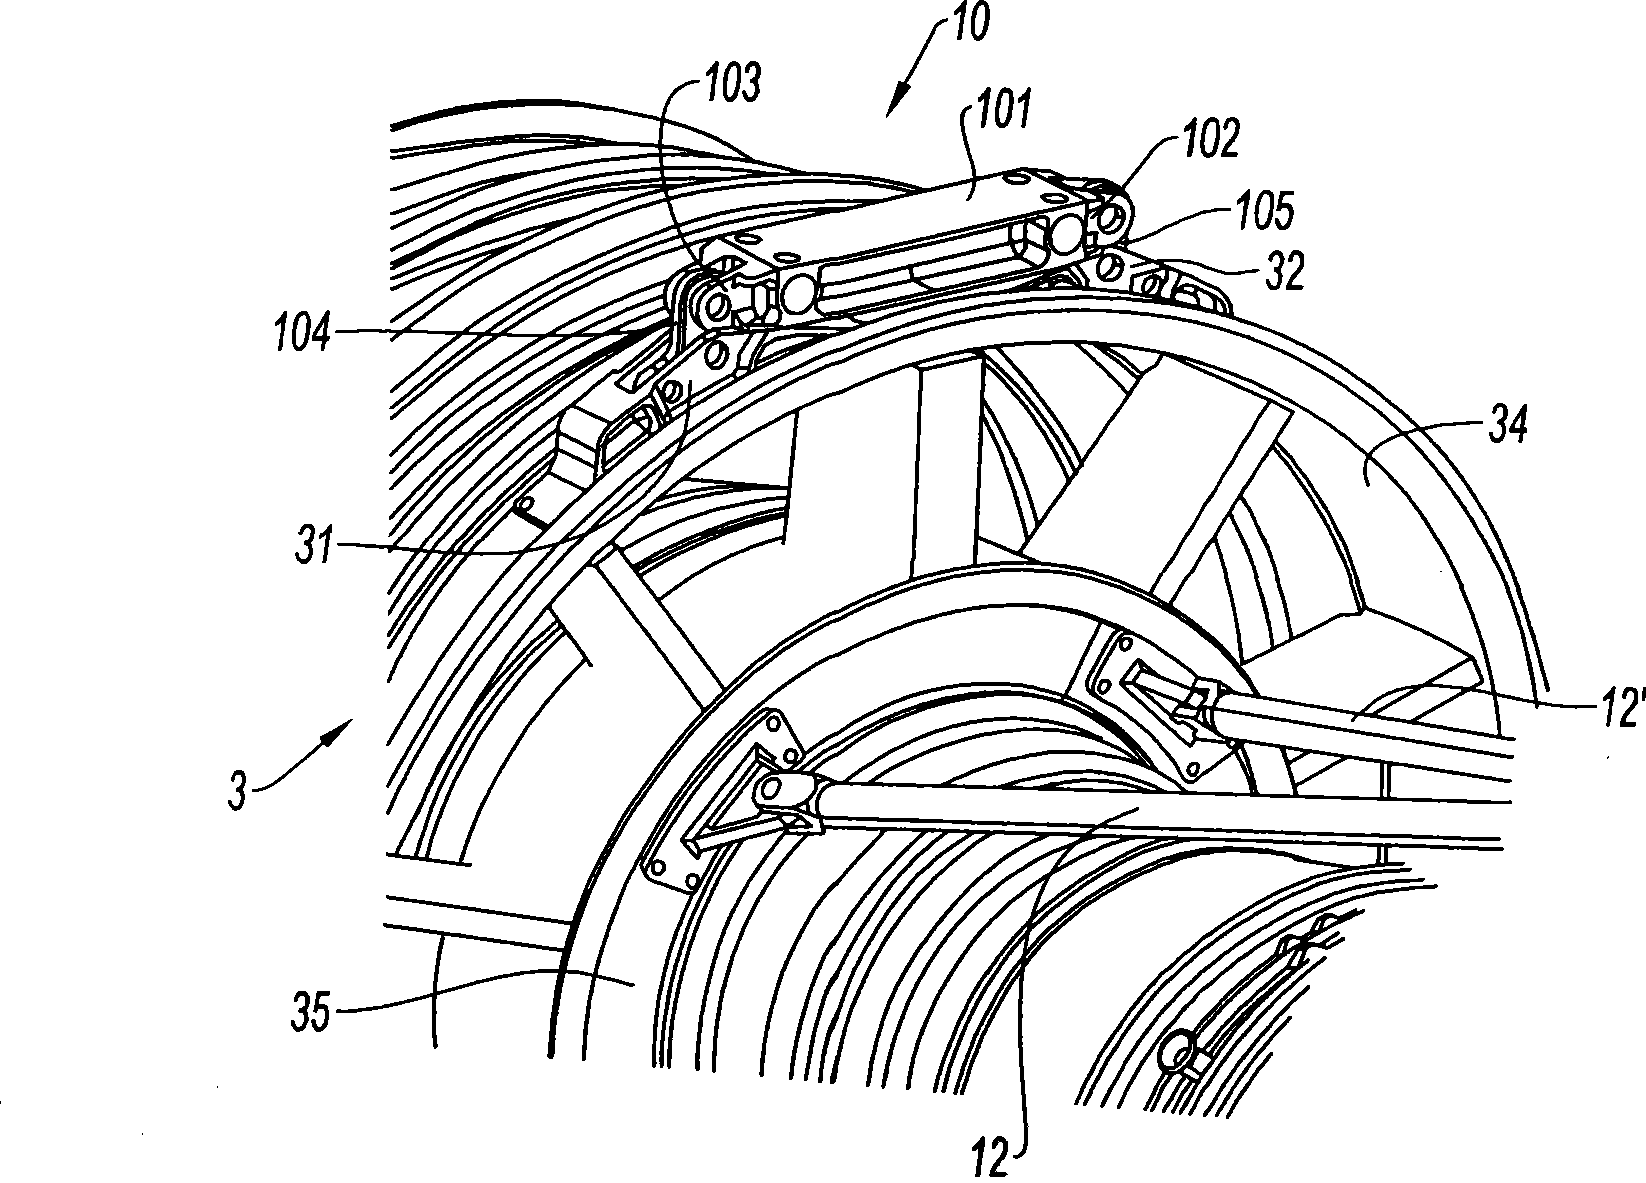 Suspension of a turbojet in an aircraft